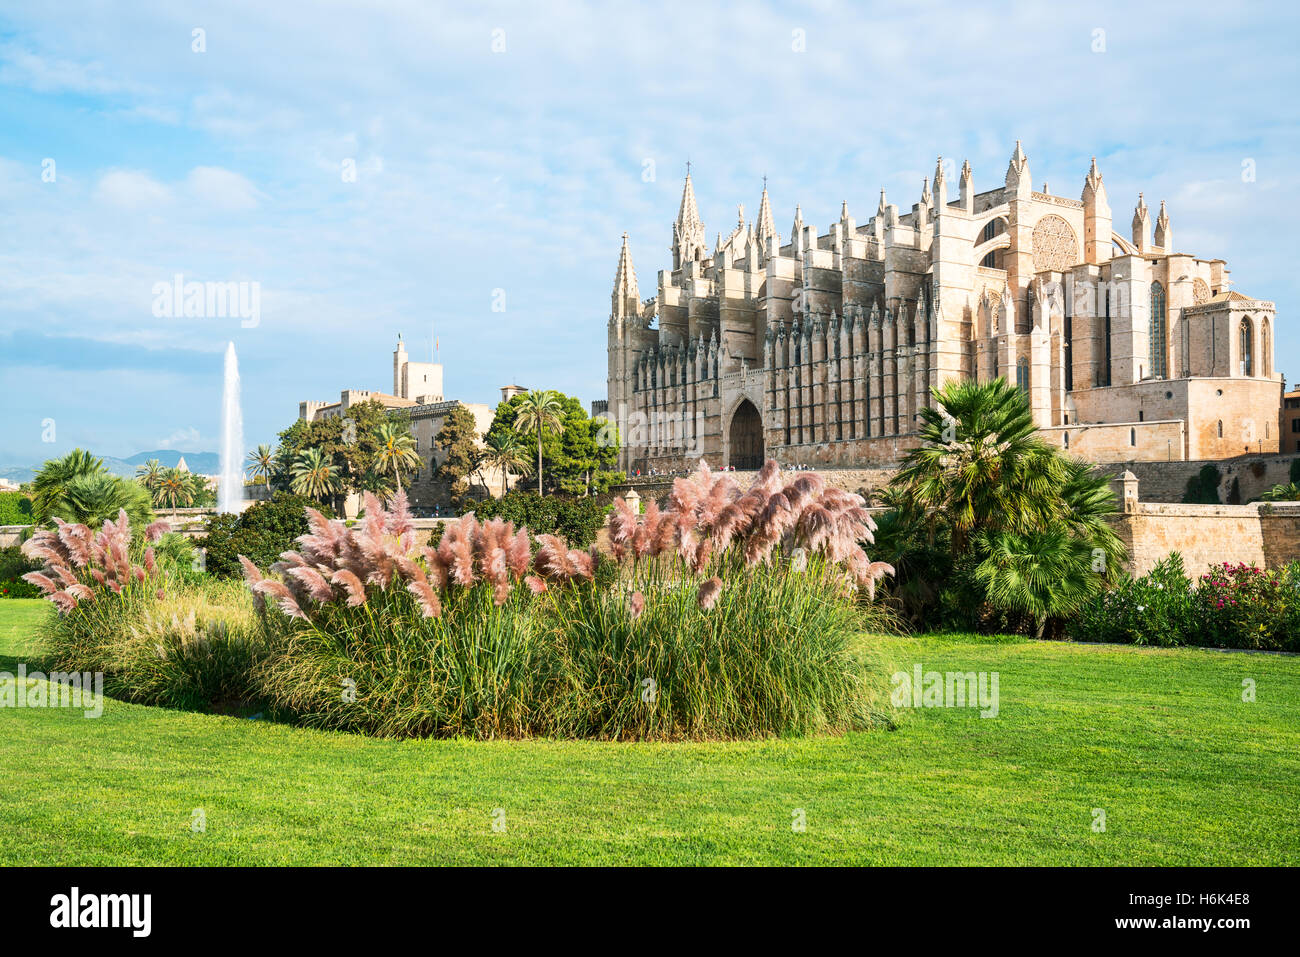 Spain, Palma de Majorca, view of the Cathedral with a garden in the foreground Stock Photo